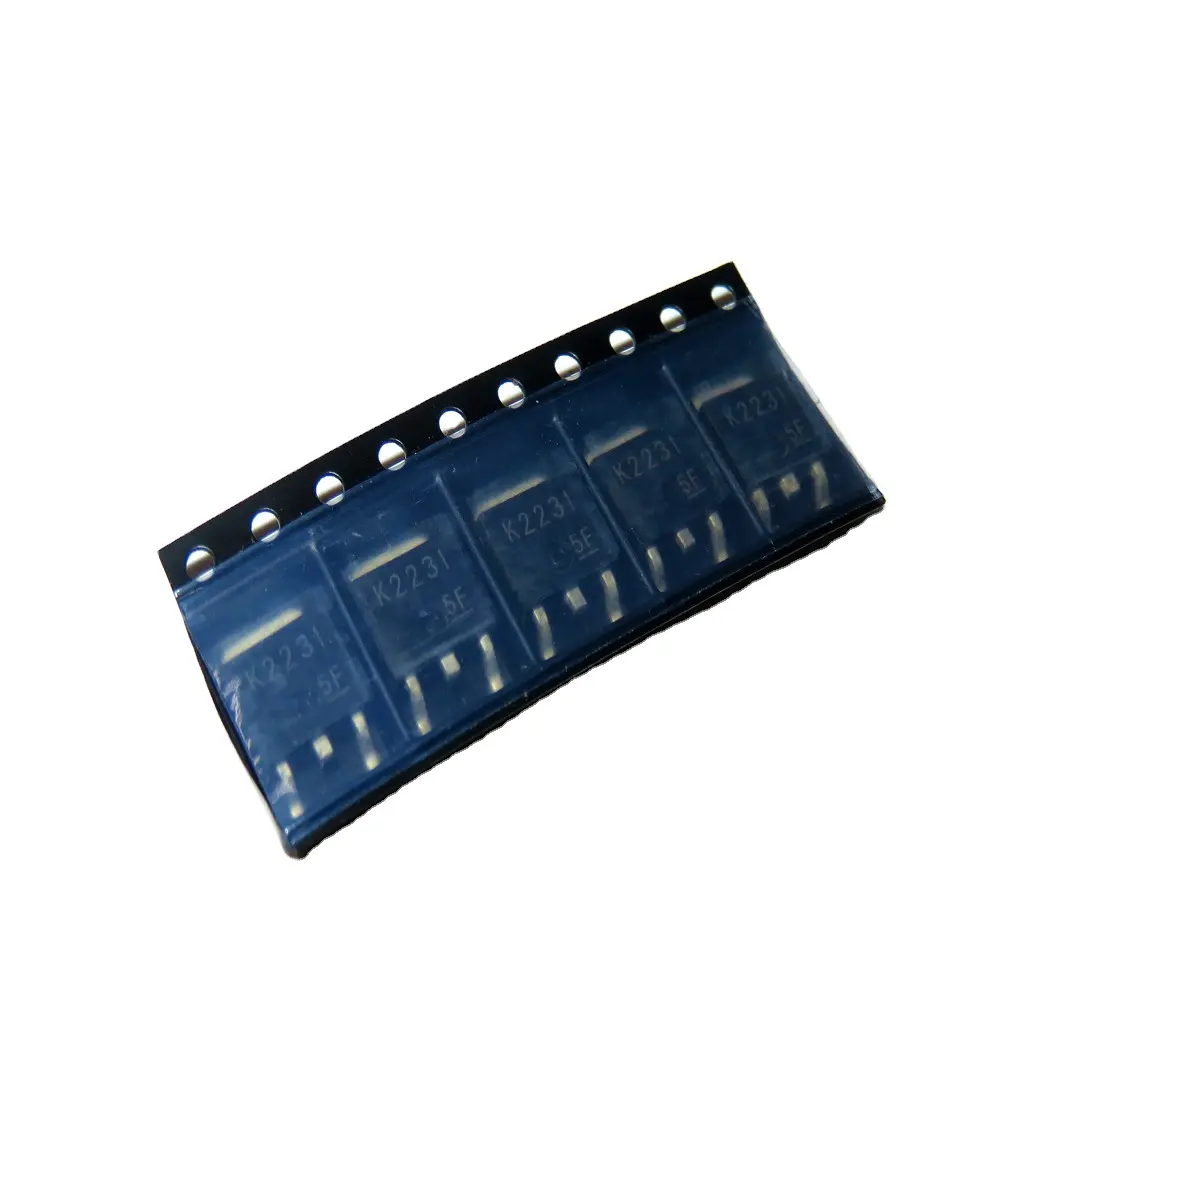 Hot selling FET 60V 5A TO-251 Integrated Circuits 2SK2231 with high quality